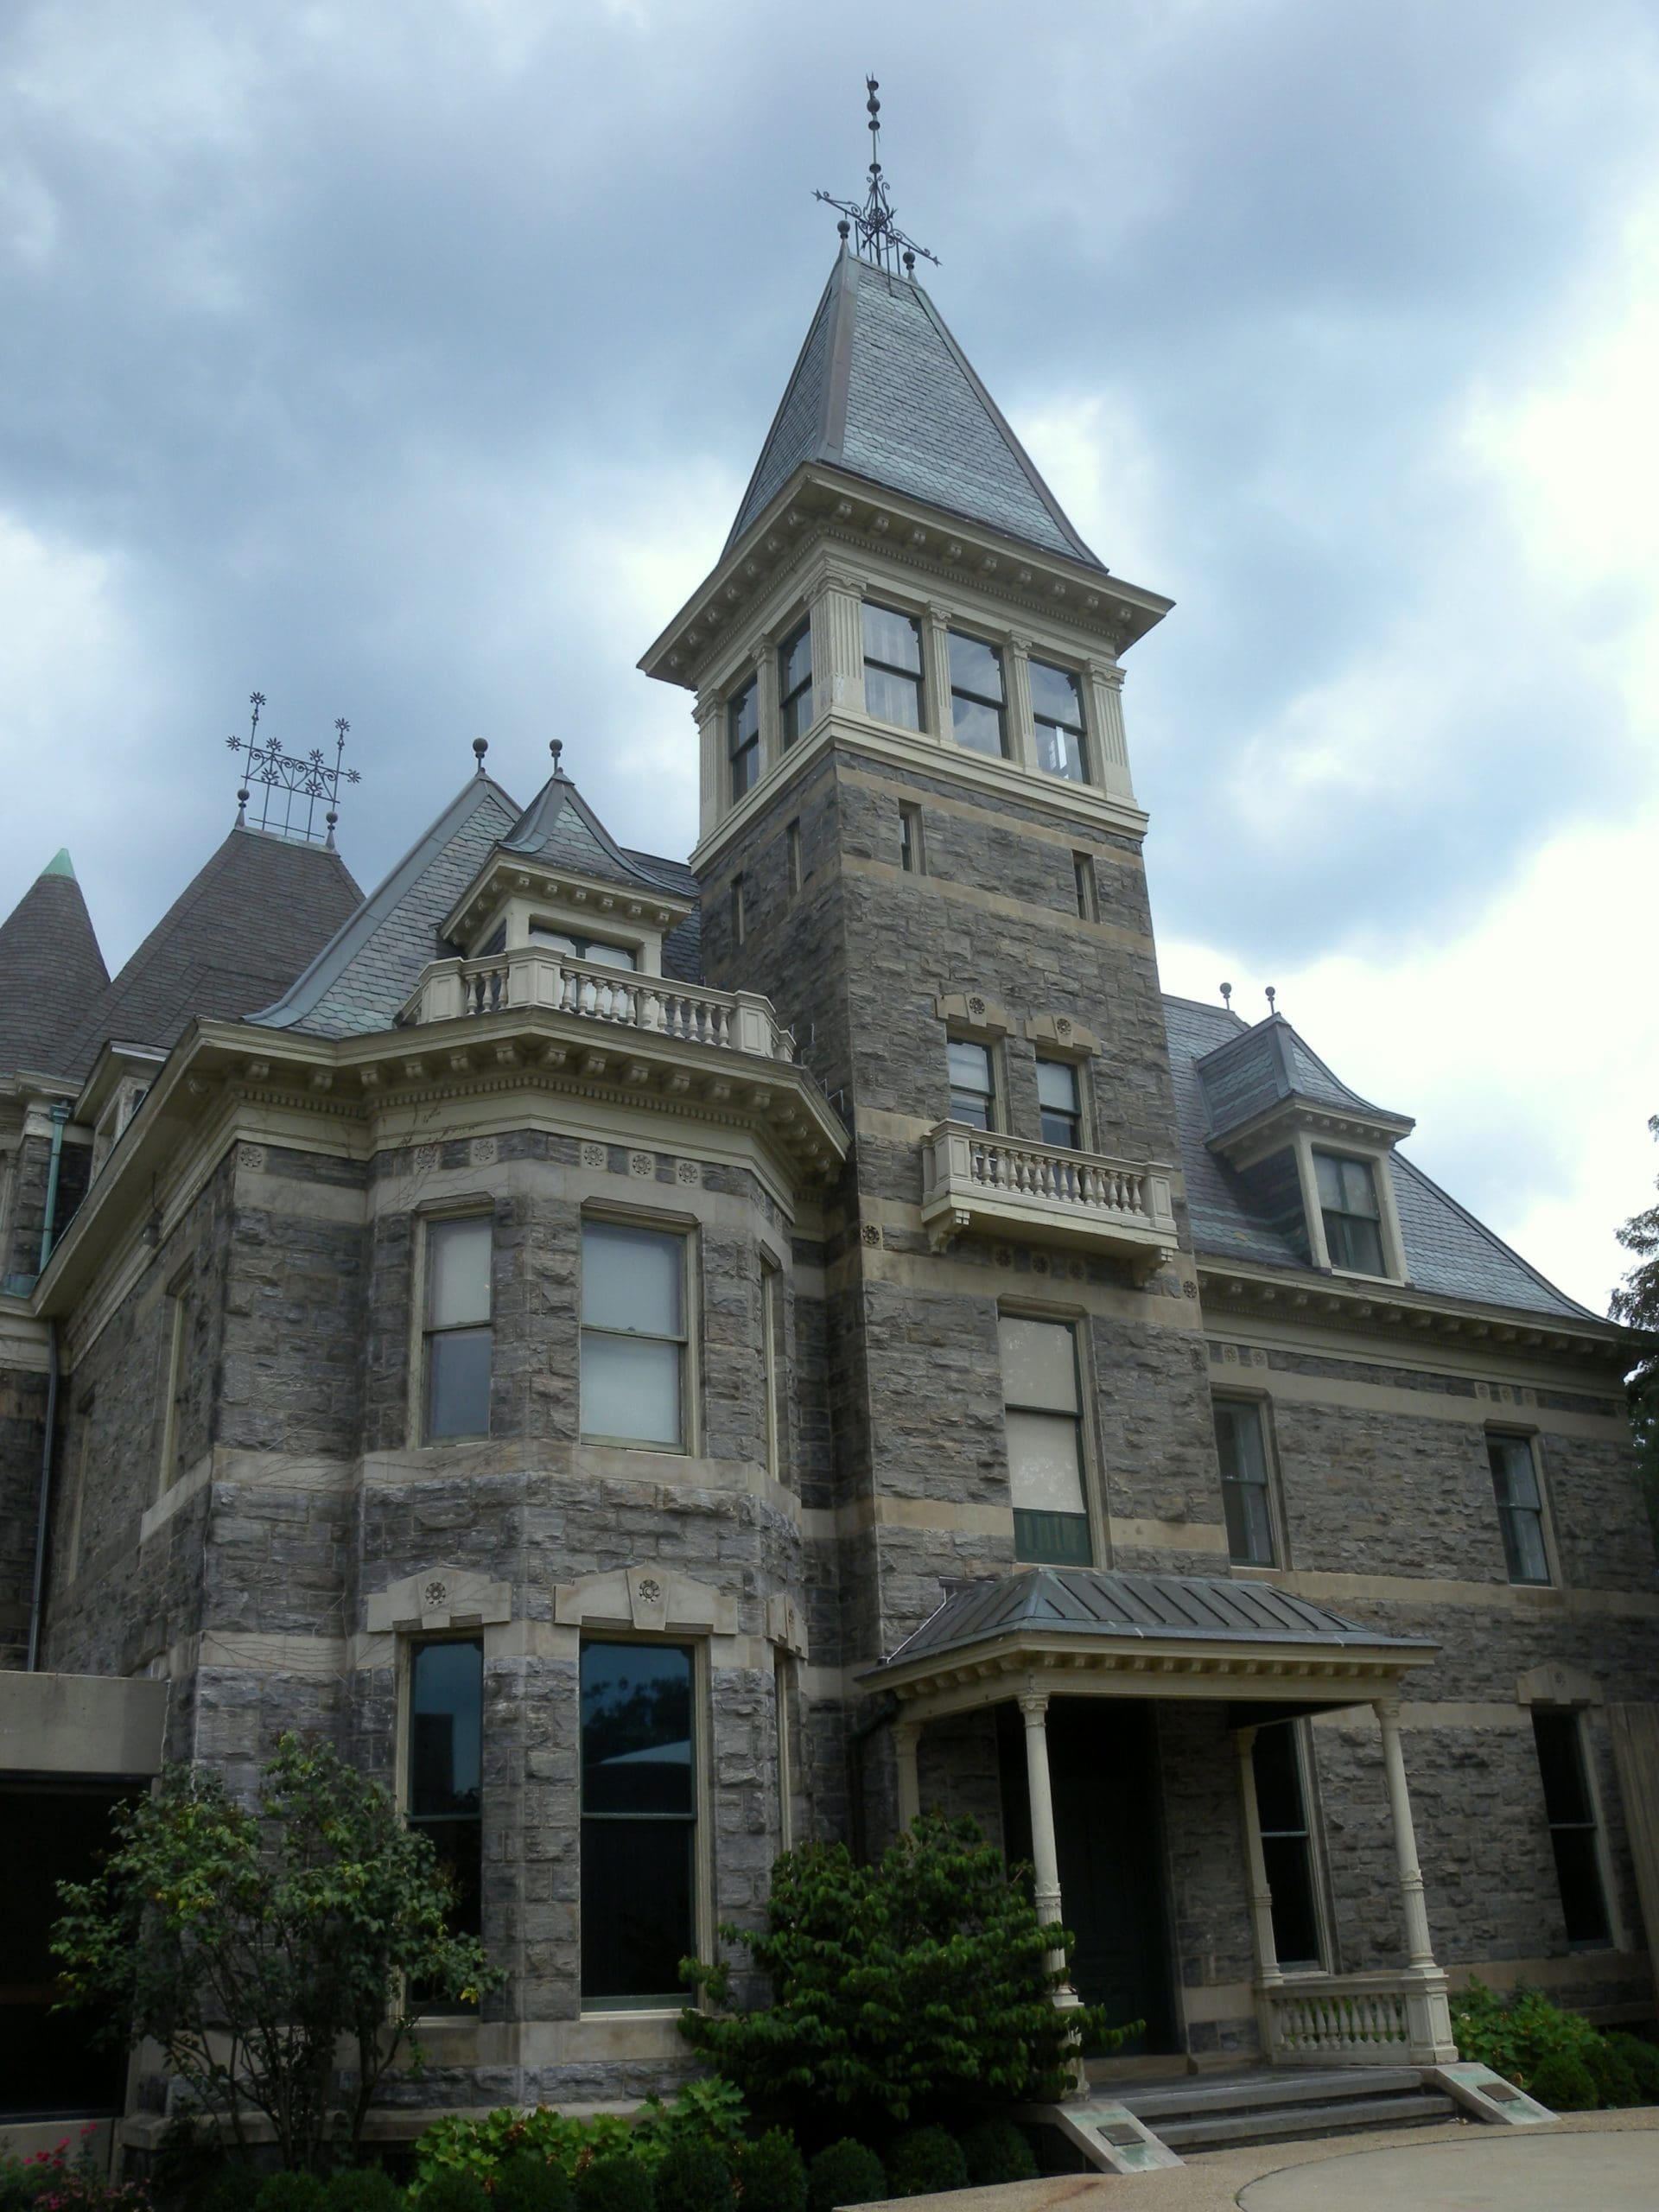 The Hudson River Museum, The Glenview Mansion